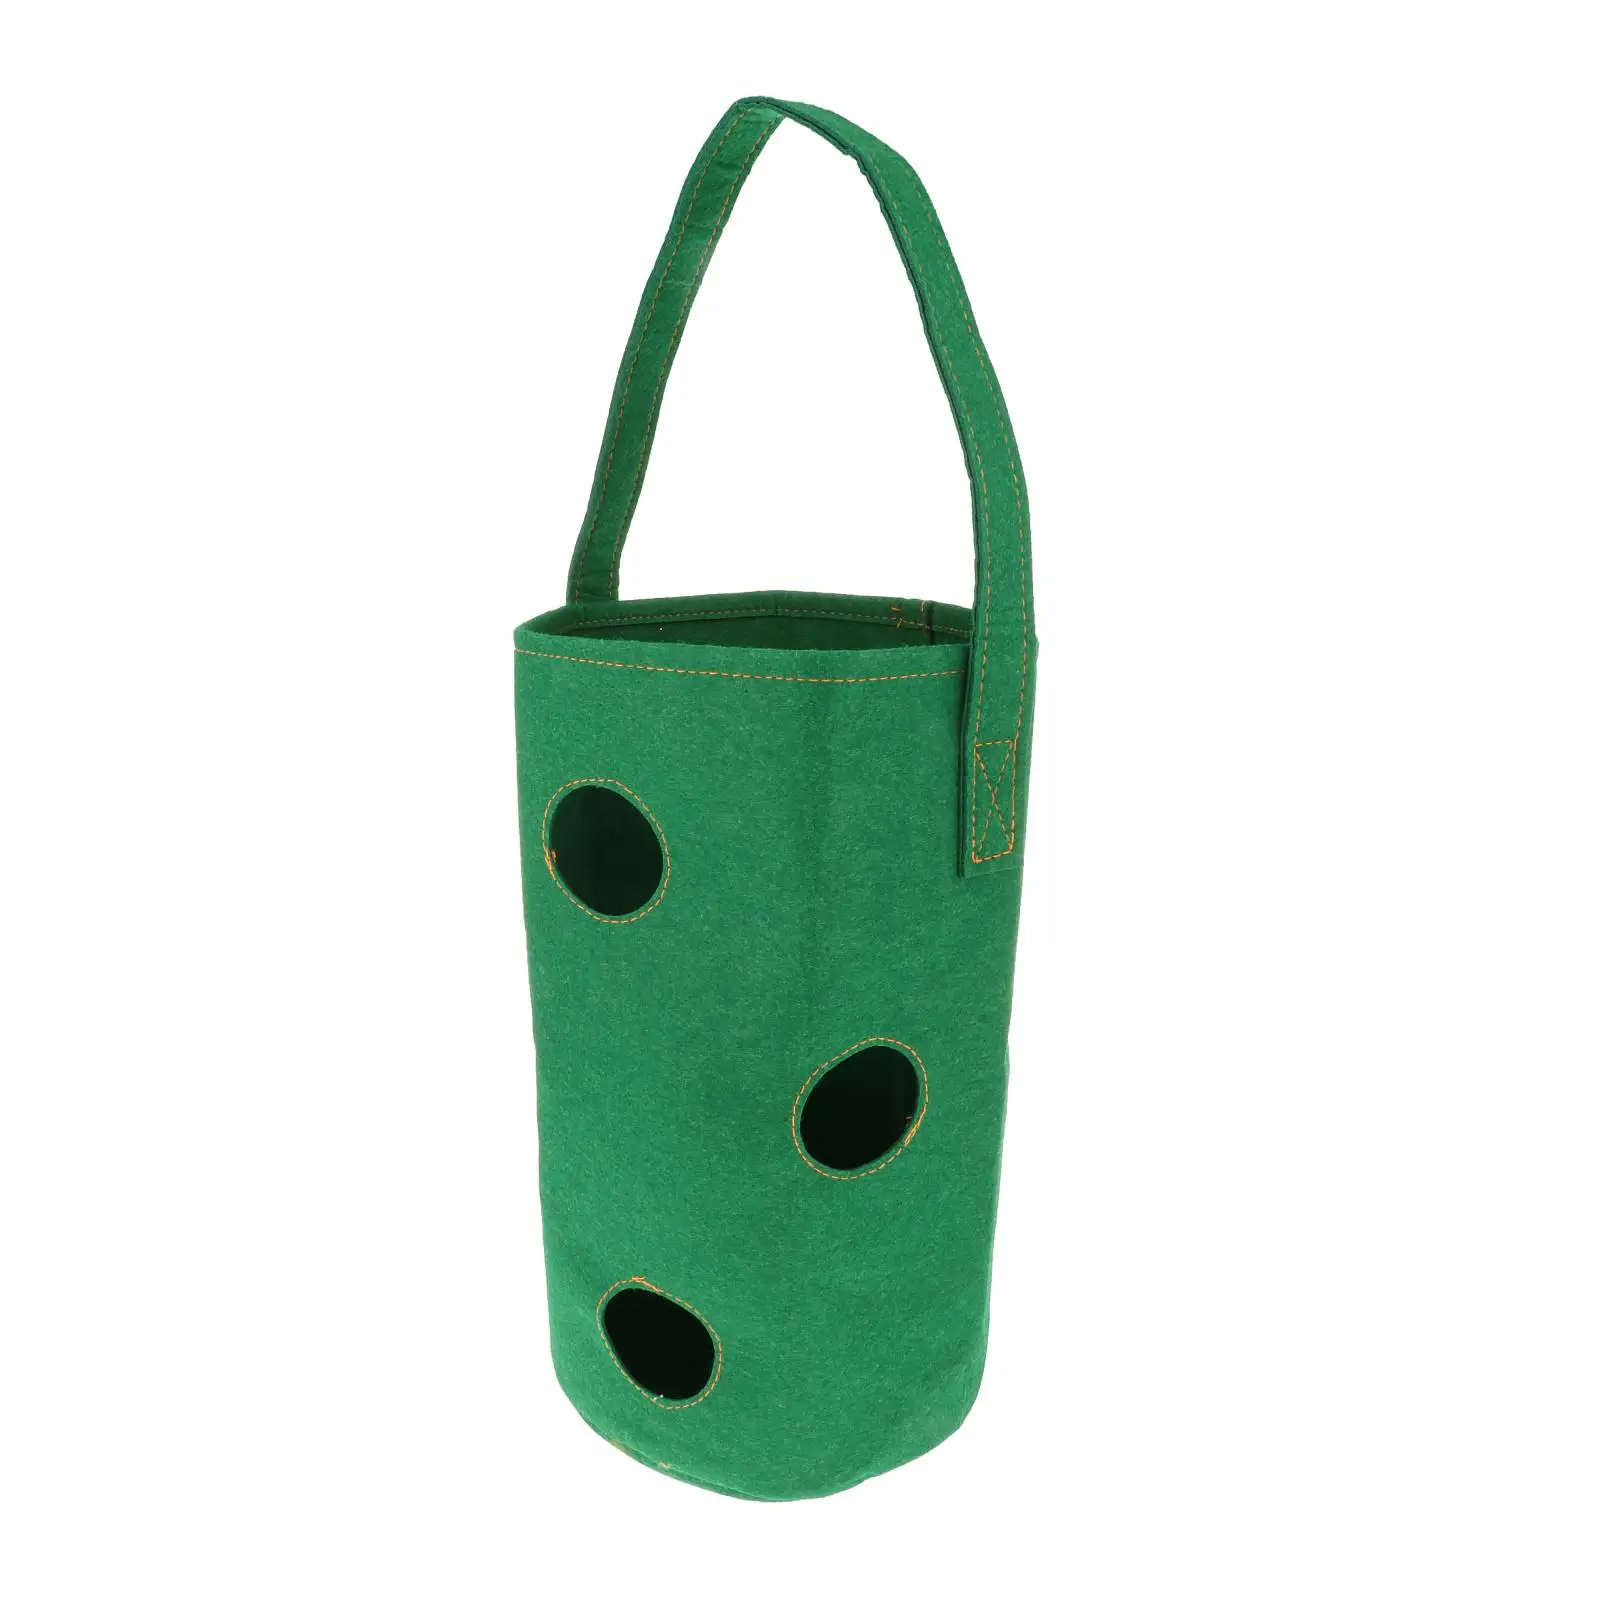 Plant Pot Garden Strawberry Tomato Hanging Grow Planter Bags Plant Pot Container Garden Tools Grow Bags for Plants